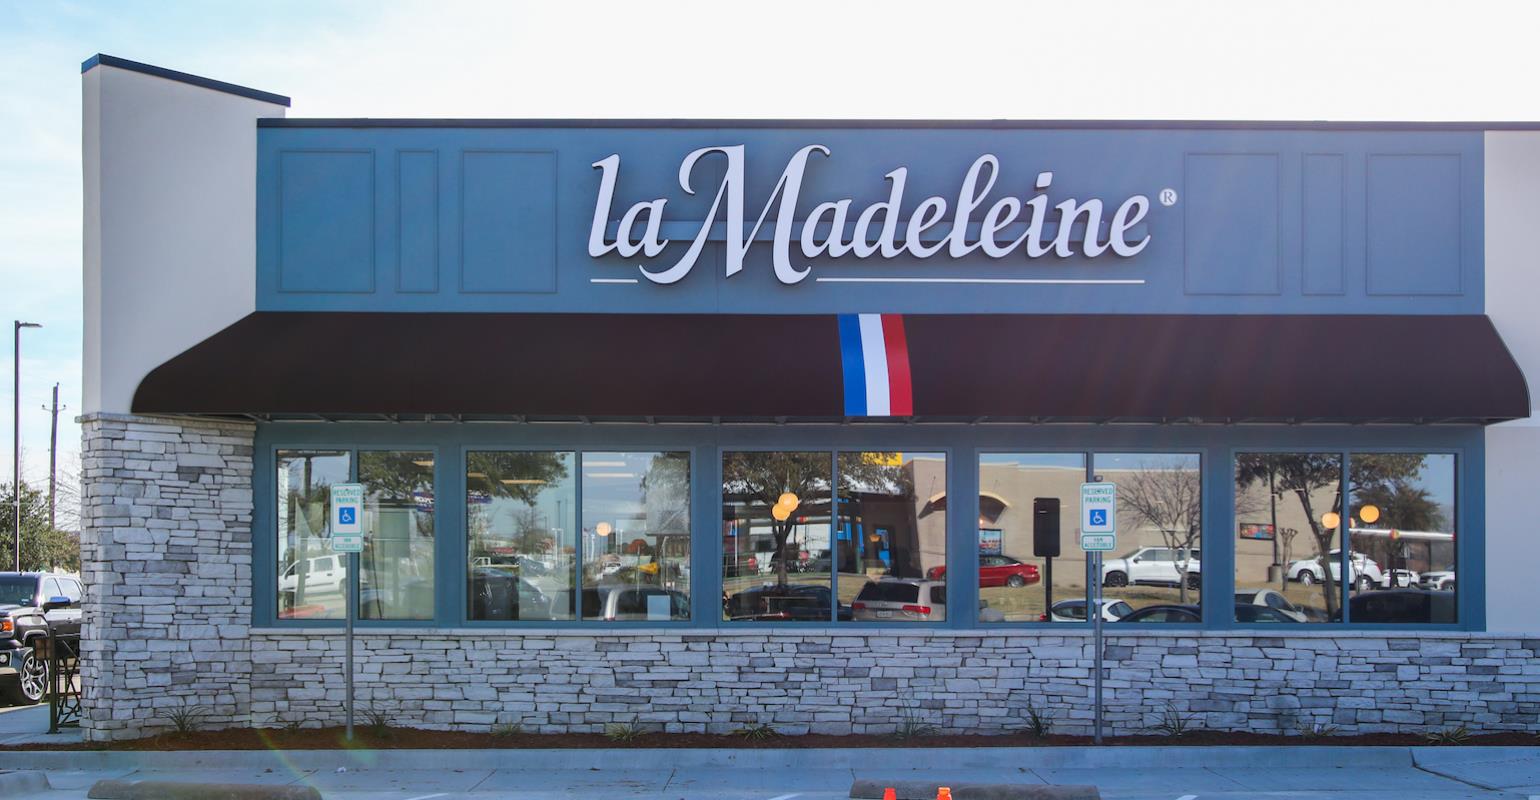 La Madeleine menu prices featuring 141 items ranging from $1.19 to $34.99